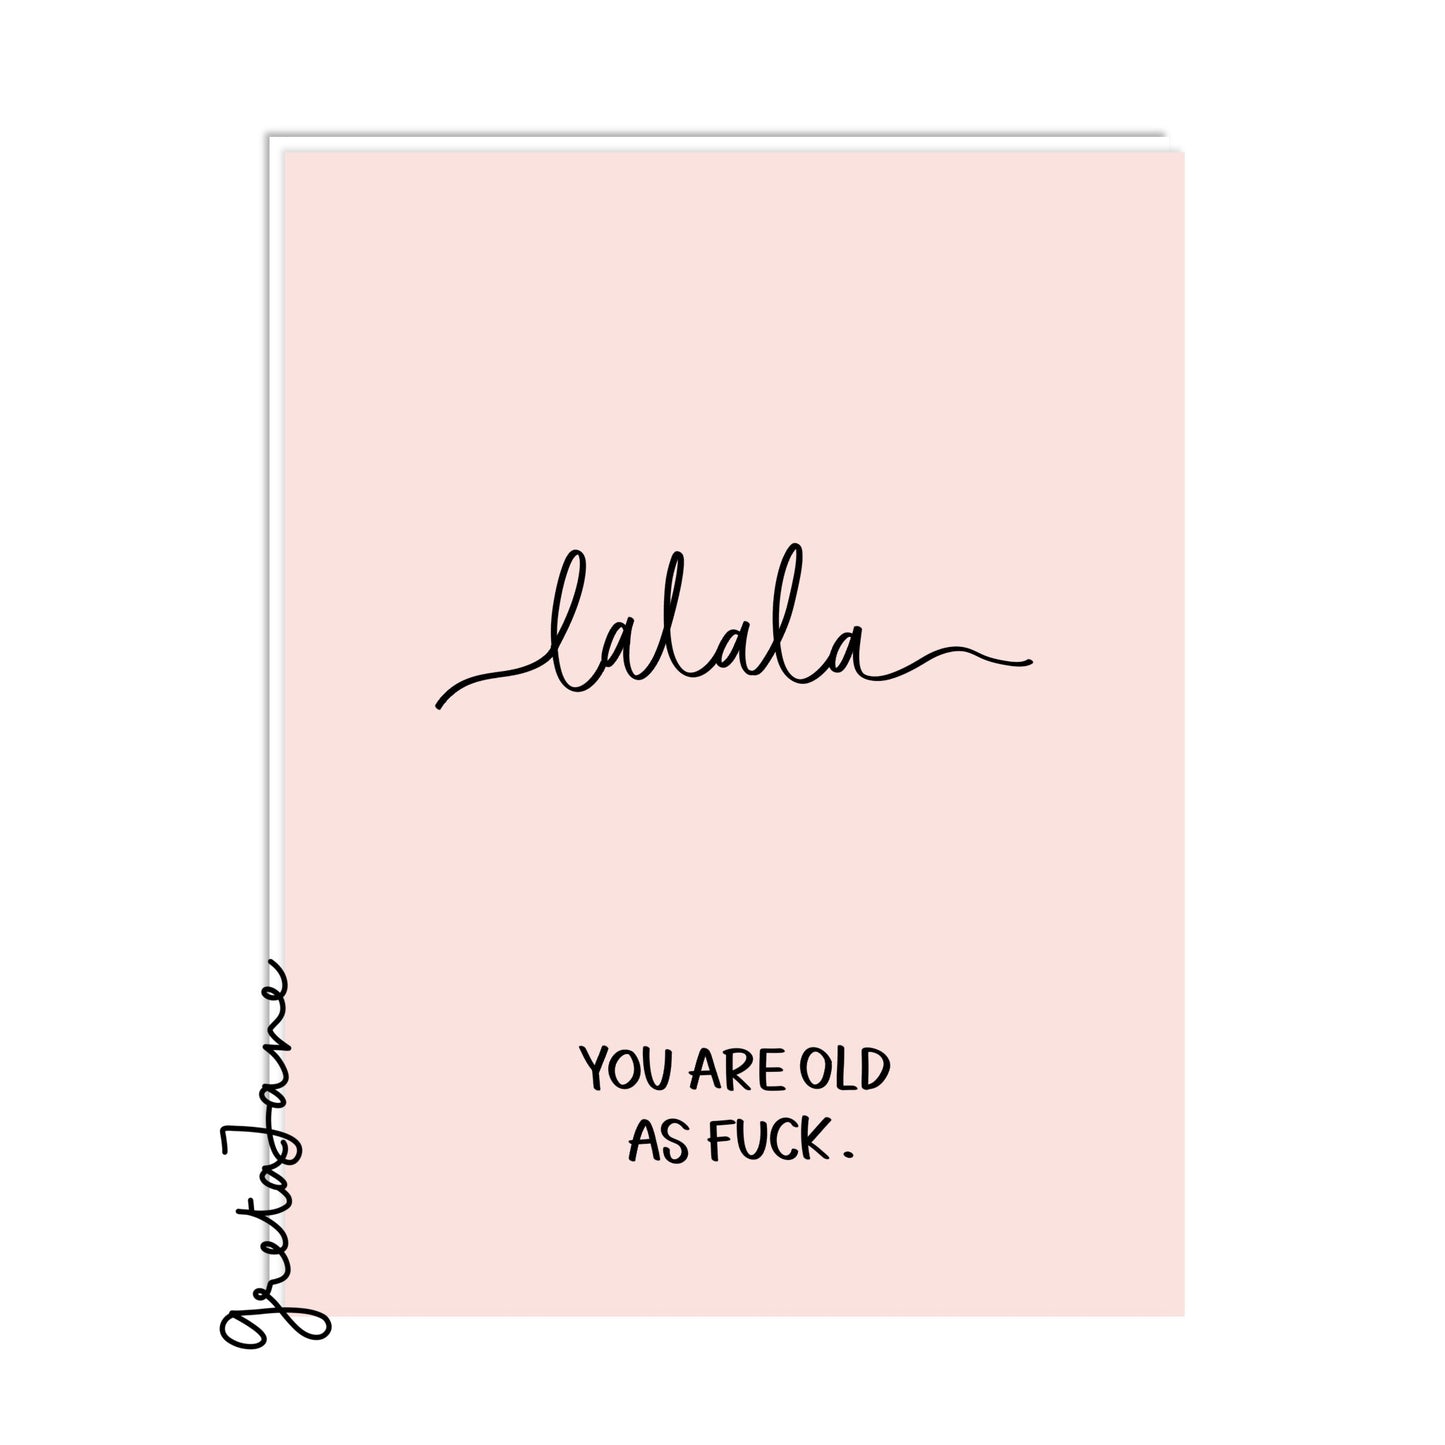 You are old as fuck